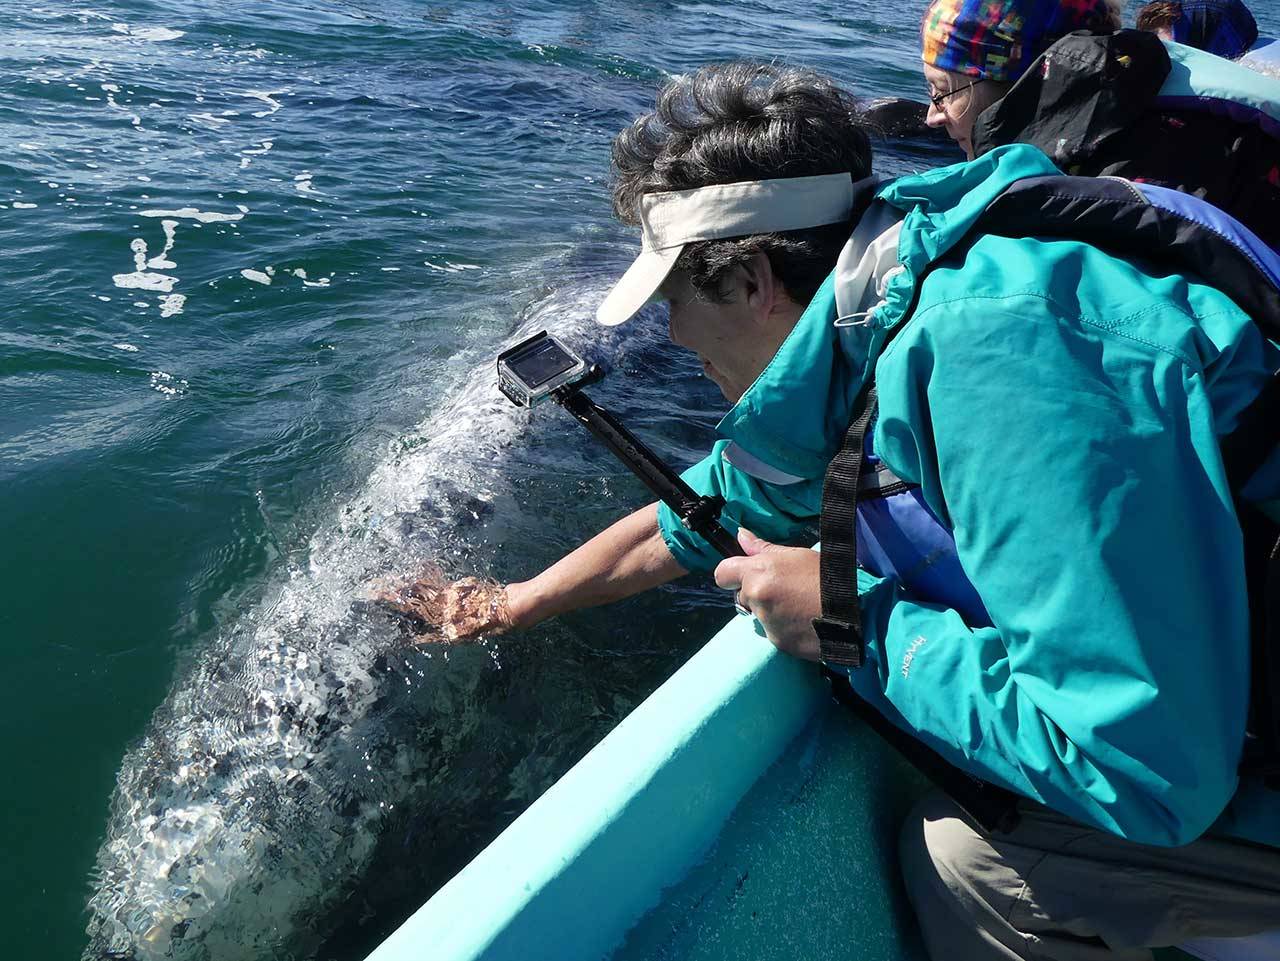 Lee Fritsch reaches out to touch a gray whale in San Ignacio Lagoon in Baja, Mexico. Called “Friendlies,” the curious whales are among a larger group that migrate to the southern waters from Alaska to birth in calm Pacific coast waters. They sometimes nudge their calves up to the small boats. (Photo submitted by Susan Berta, Orca Network)